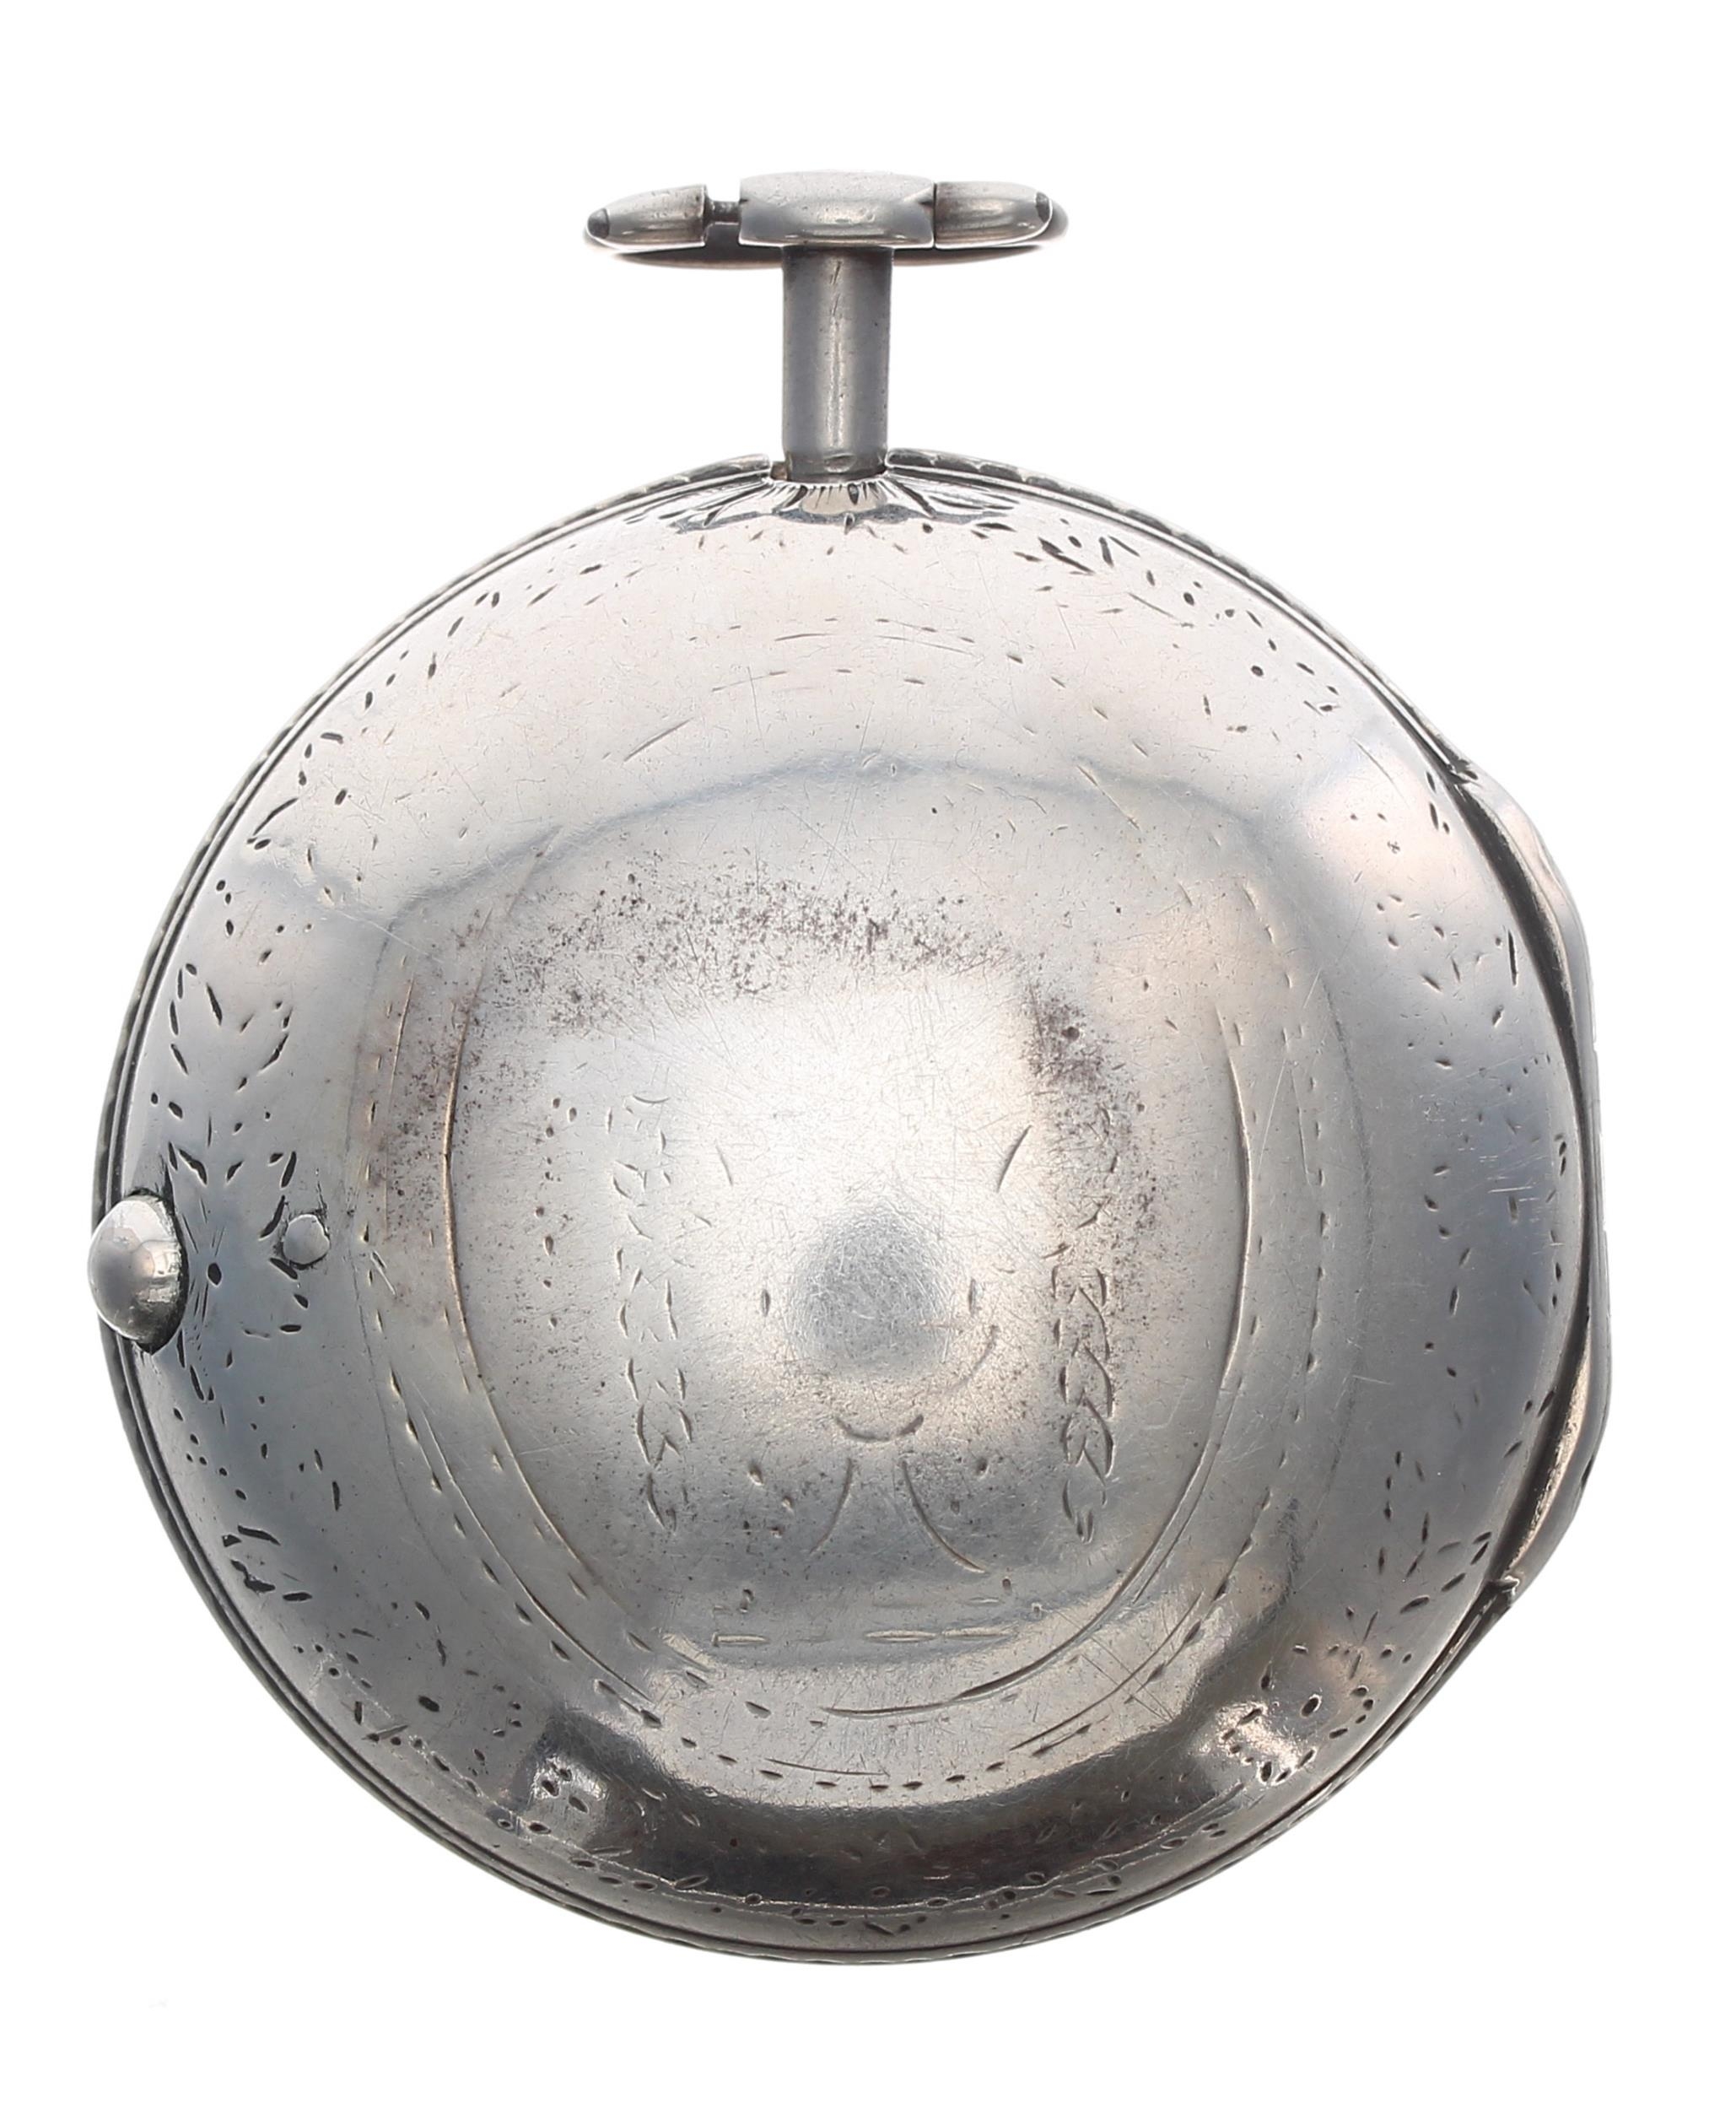 George III silver pair cased verge pocket watch, London 1775, the fusee movement signed J. Richards, - Image 2 of 5